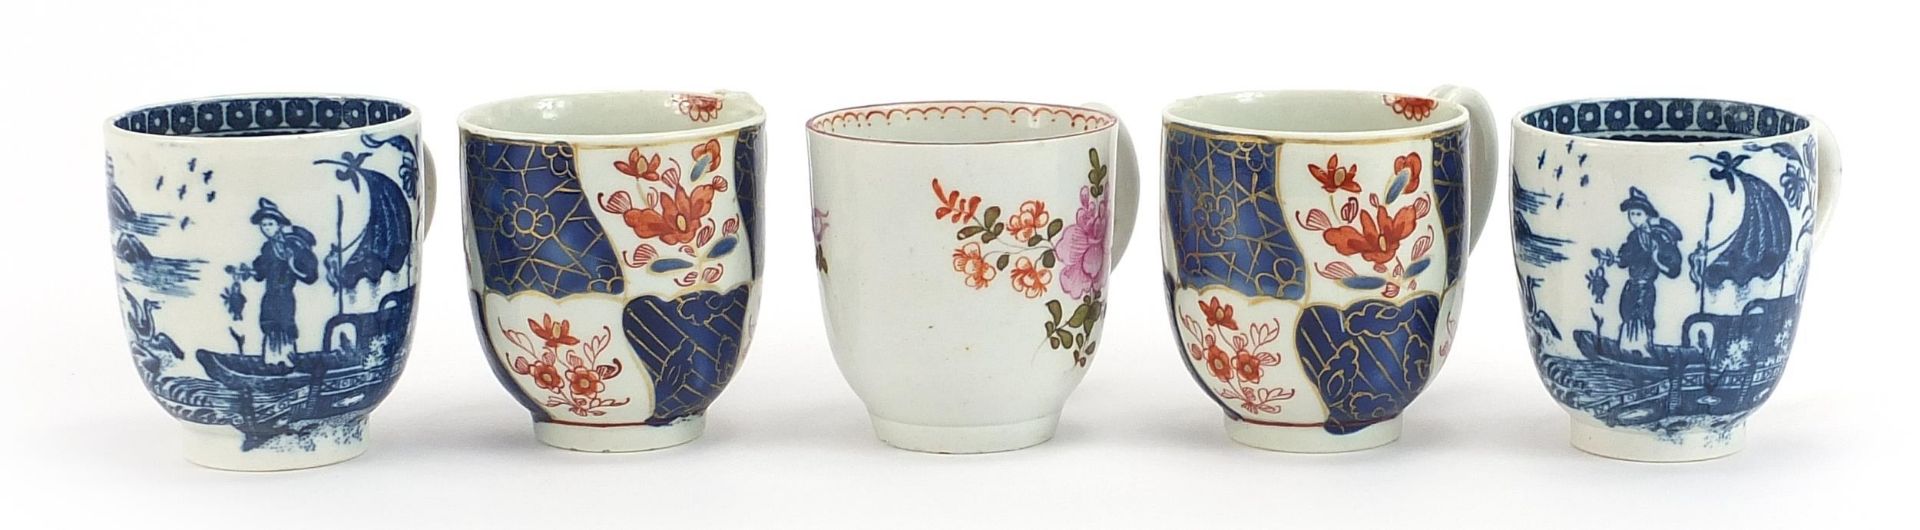 Five 18th century English porcelain coffee cups including Worcester Fisherman pattern, each